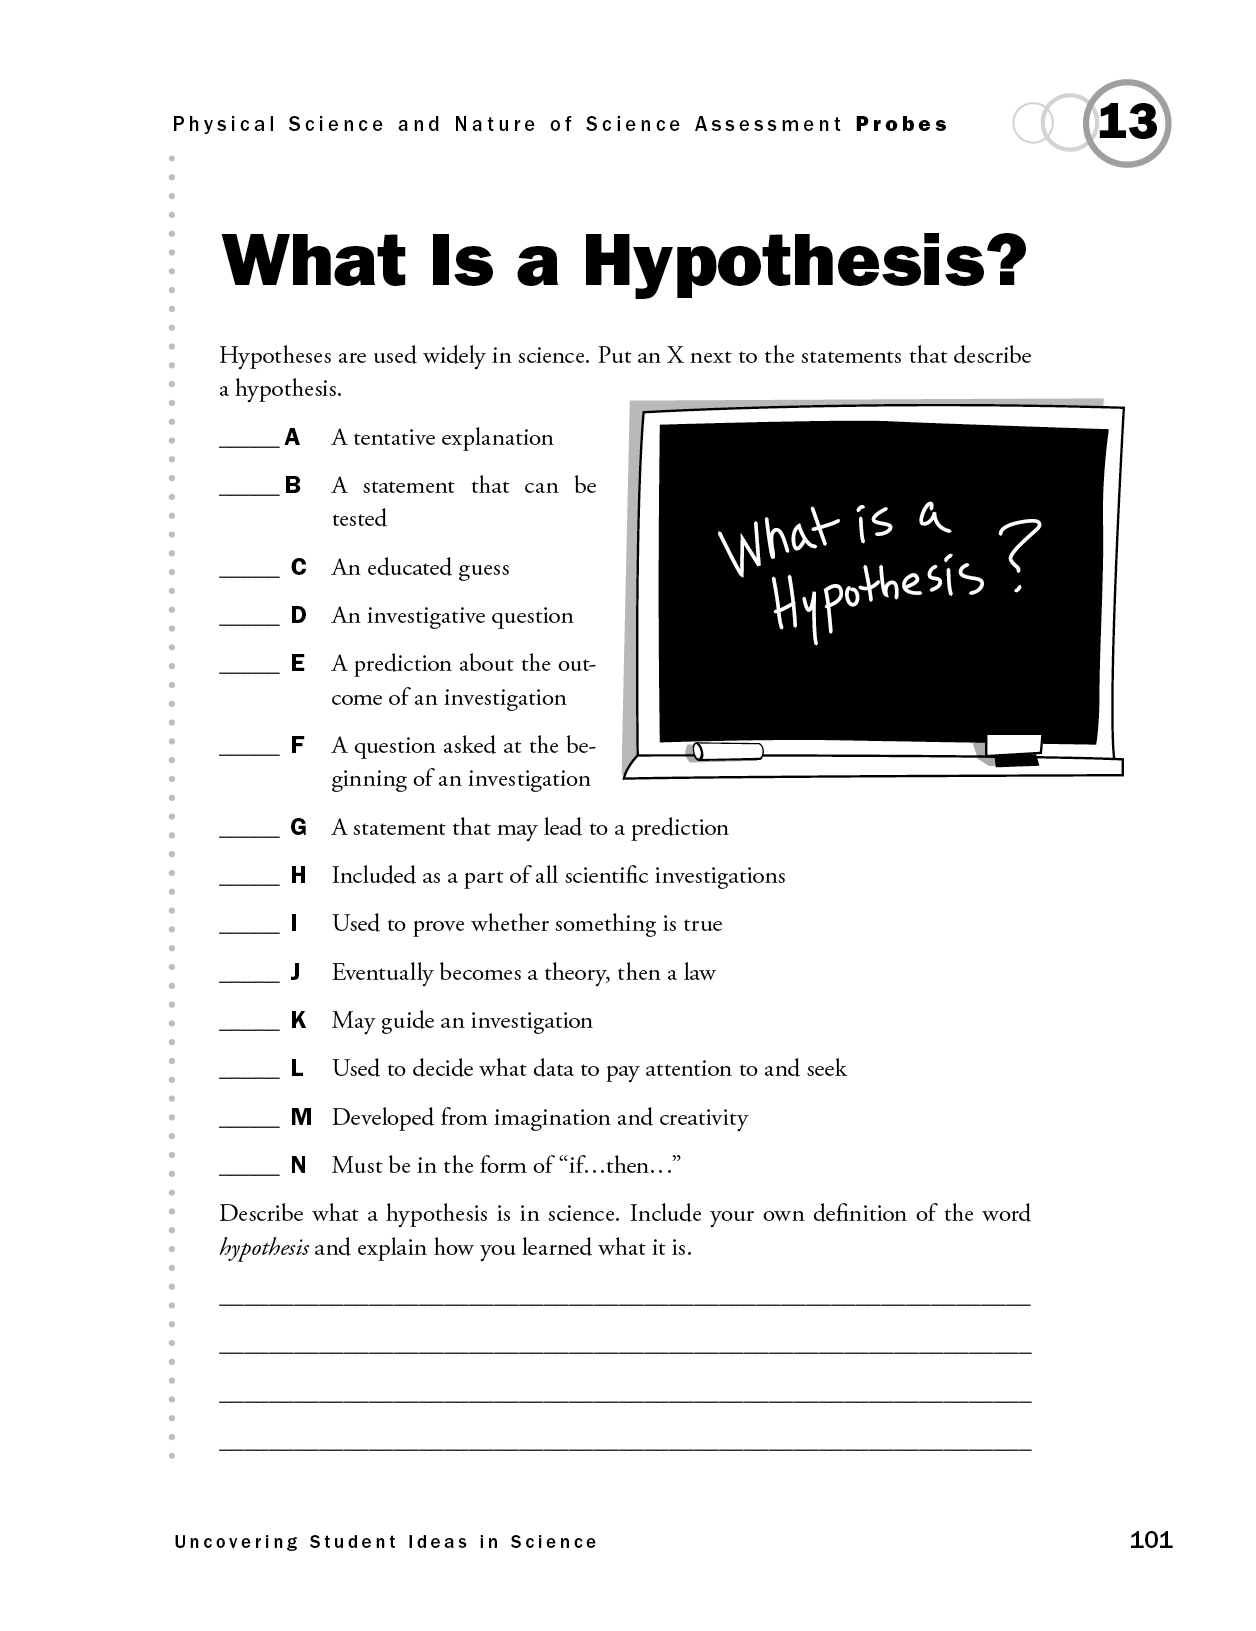 Correct Hypotheses and Careful Reading Are Essential: Results of